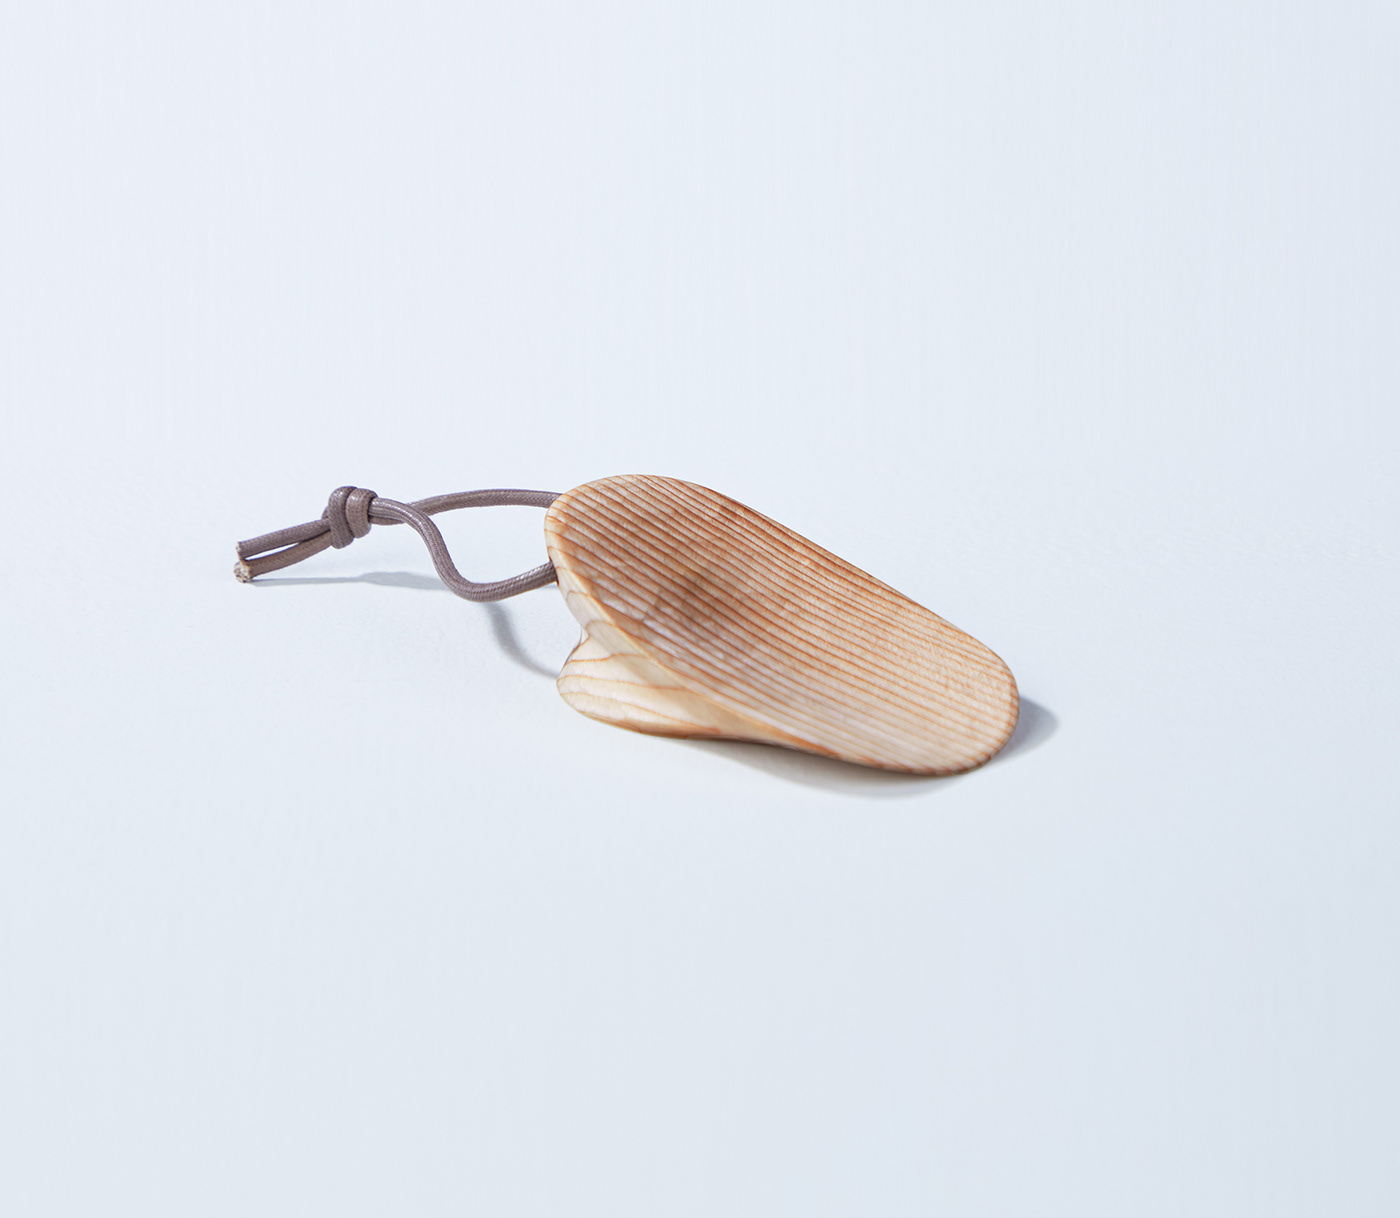 brand identity craft industrial design  product product design  shoehorn artwork metal plastic wood